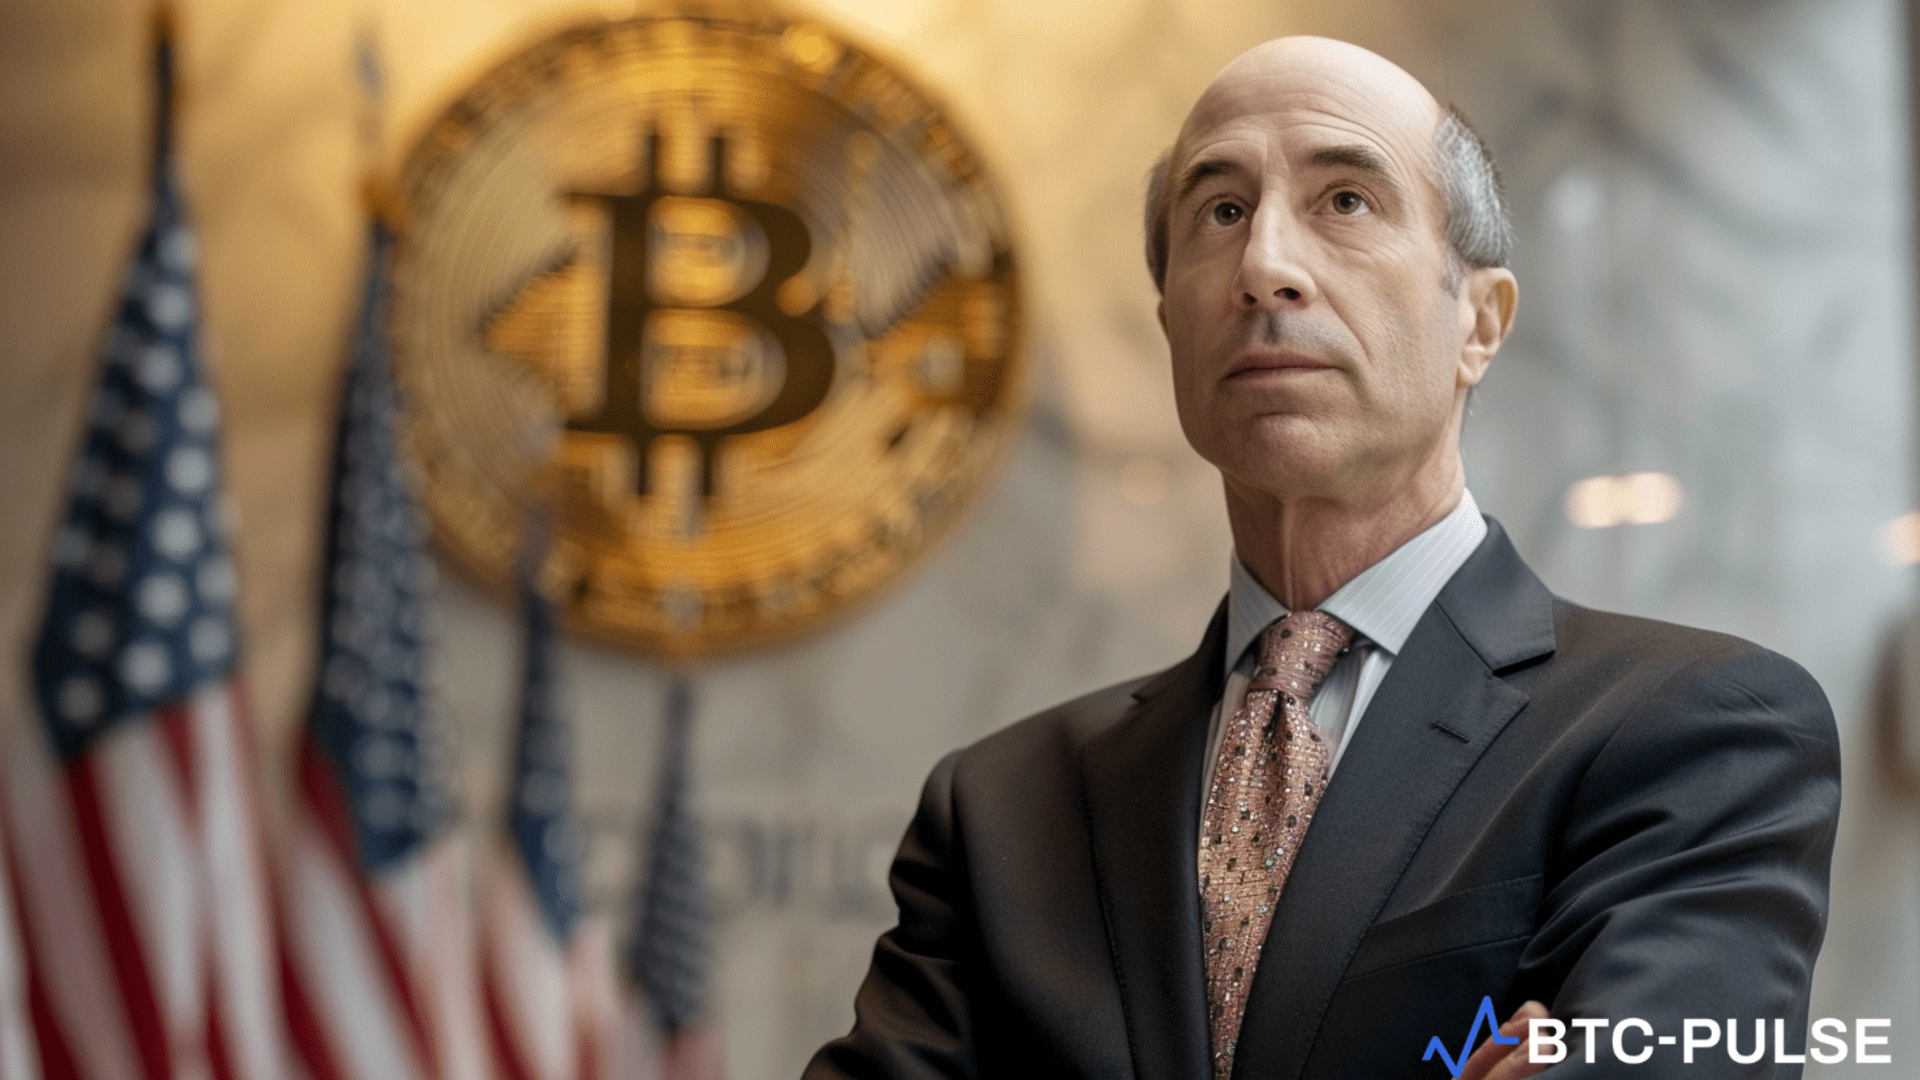 Coinbase legal team seeks crucial emails from SEC Chair Gary Gensler for defense in ongoing lawsuit.